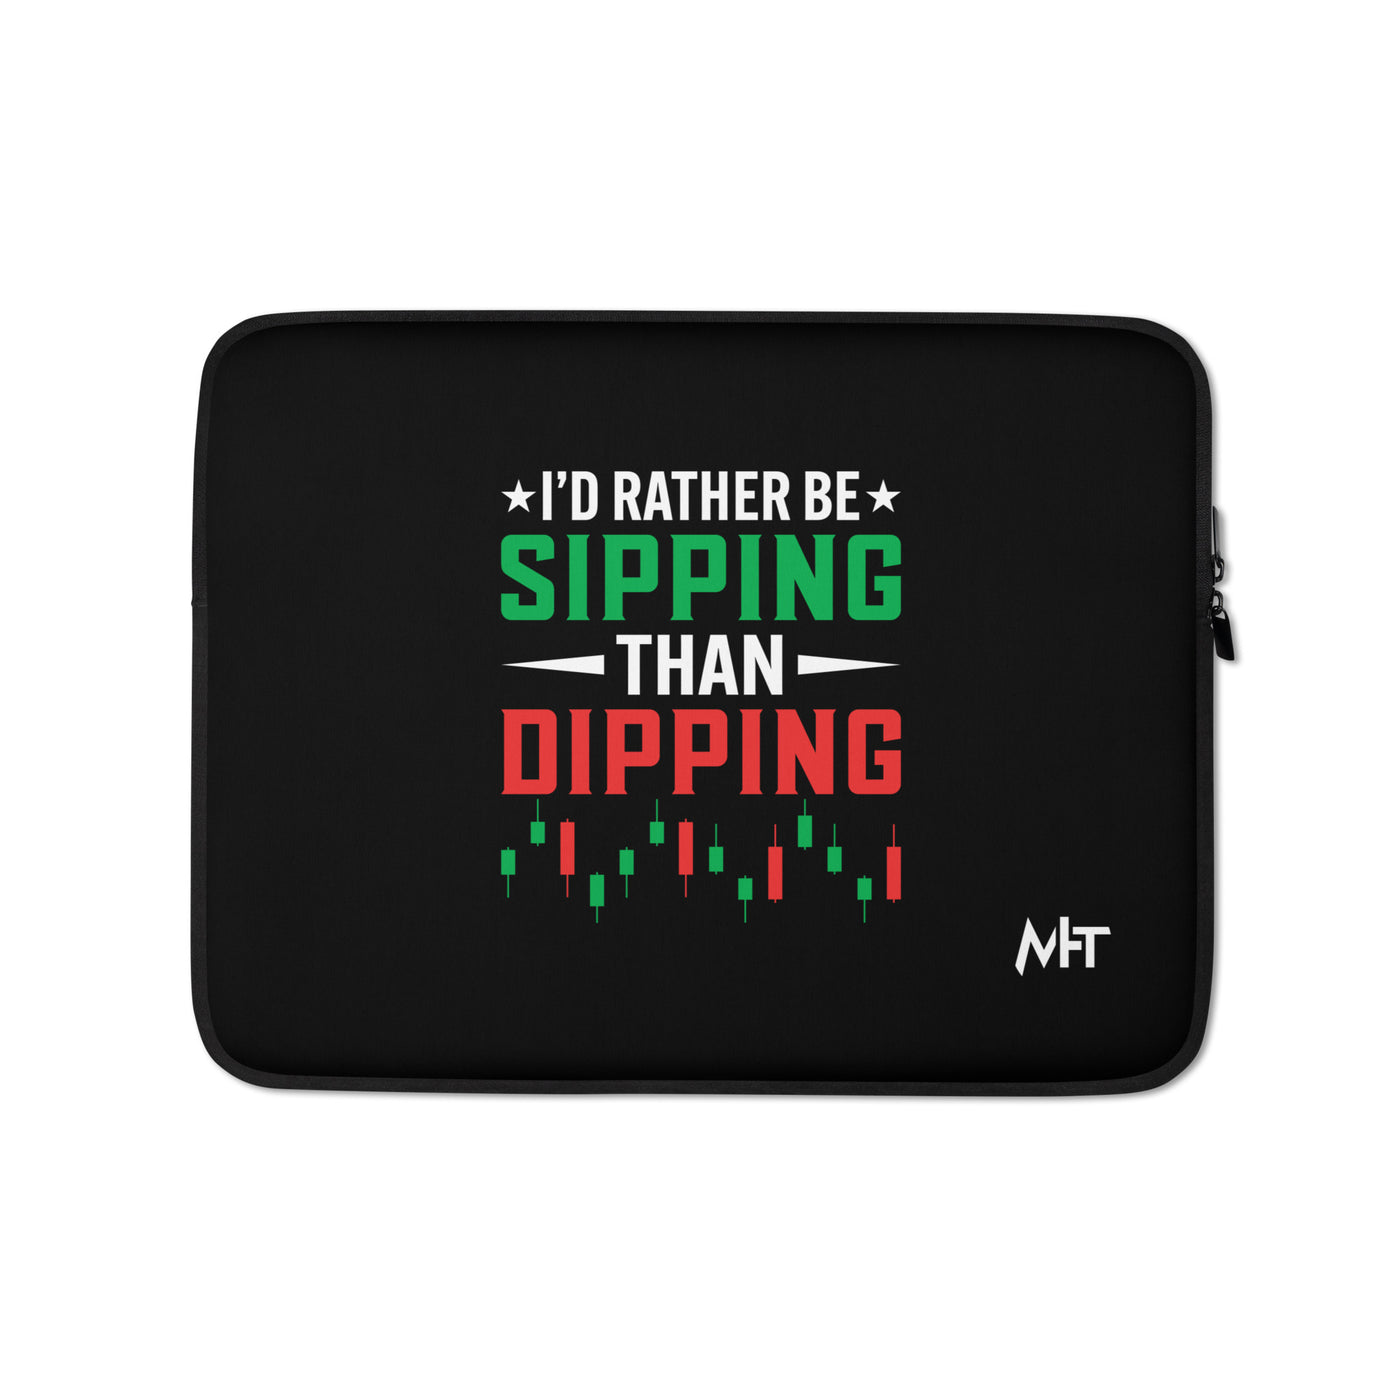 I'd rather be Sipping than Dipping - Laptop Sleeve